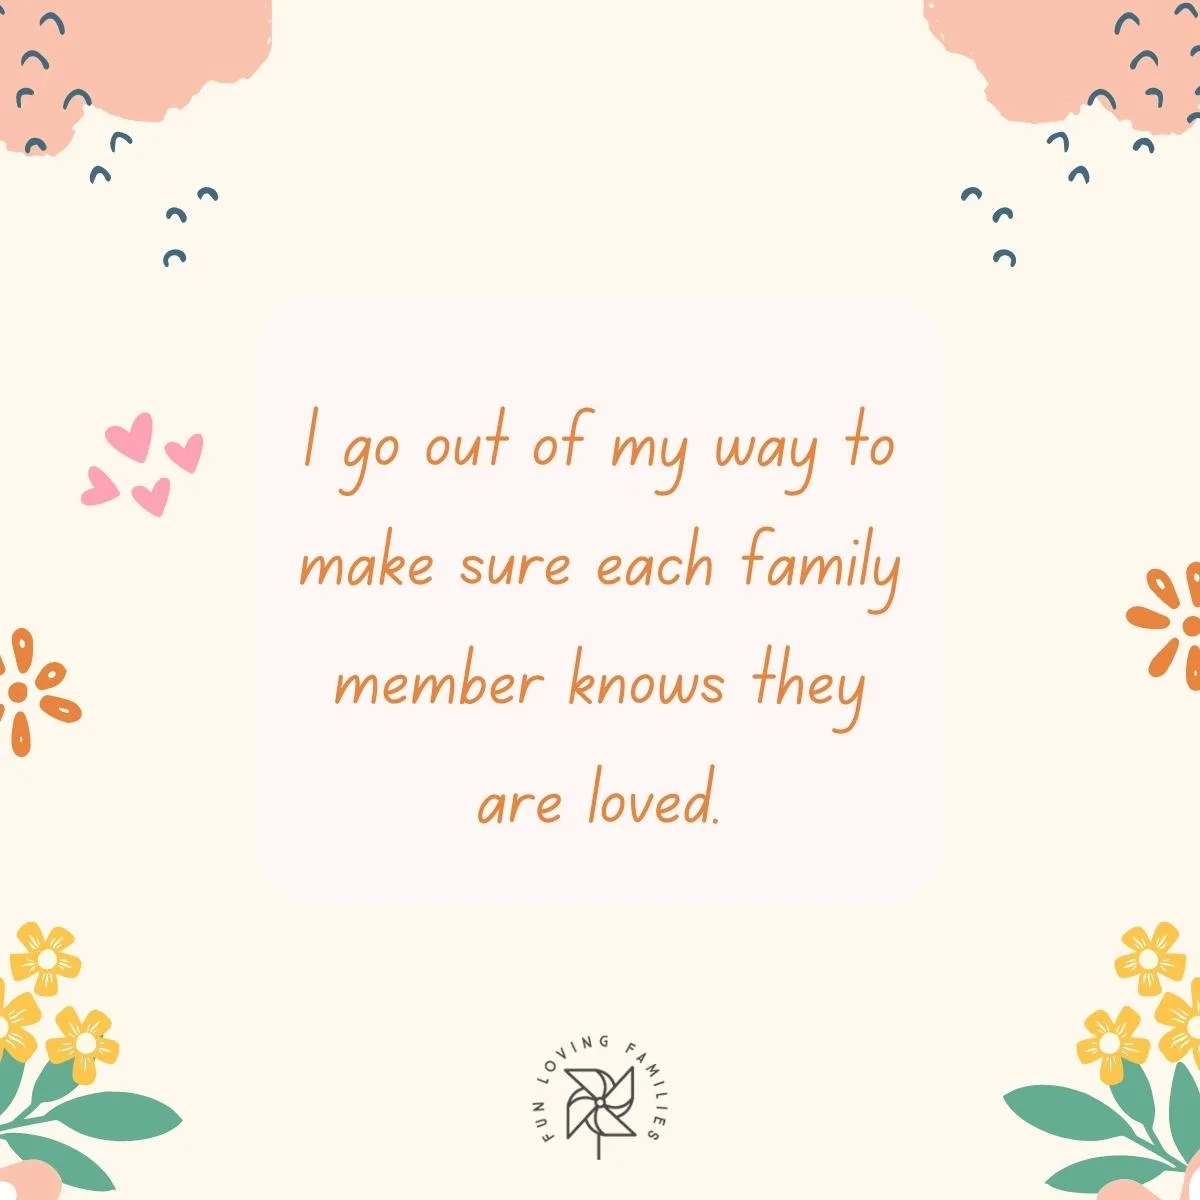 Make sure each family member knows they are loved affirmation